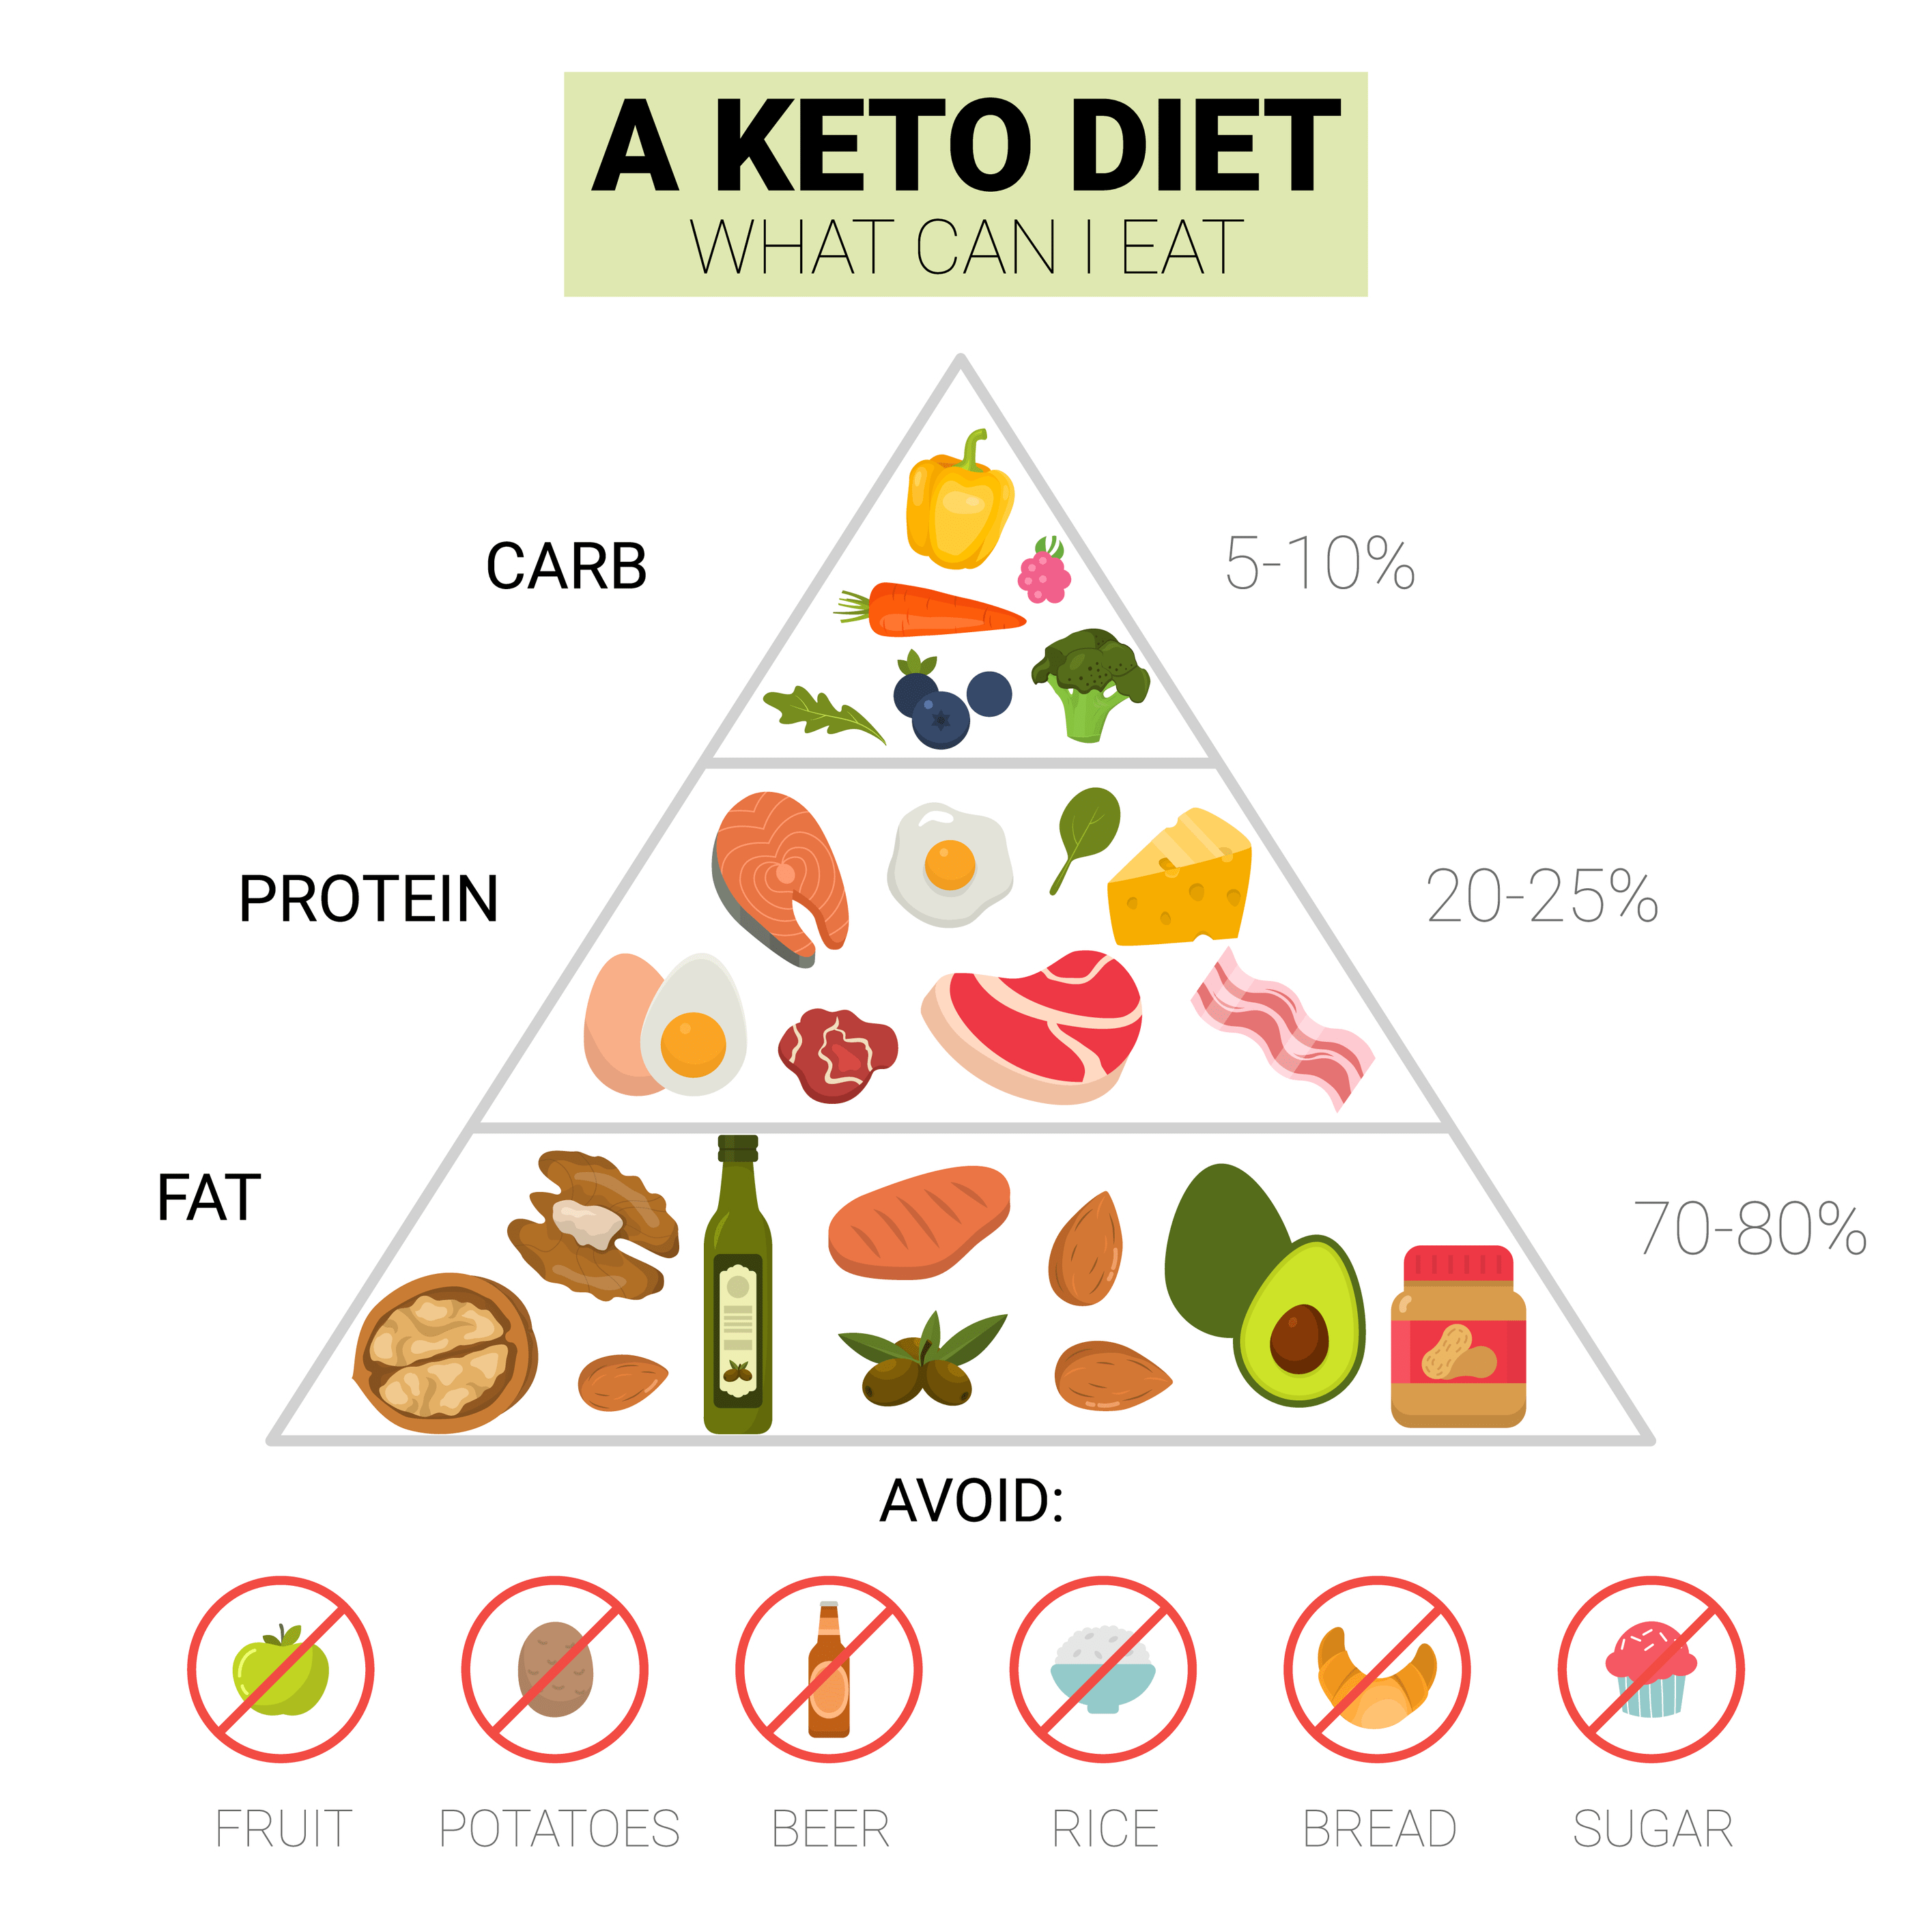 Infographic of the keto diet food pyramid. Click to learn about getting a customized keto diet plan designed based on your activity level, food preferences, weight goals, and other personal criteria.